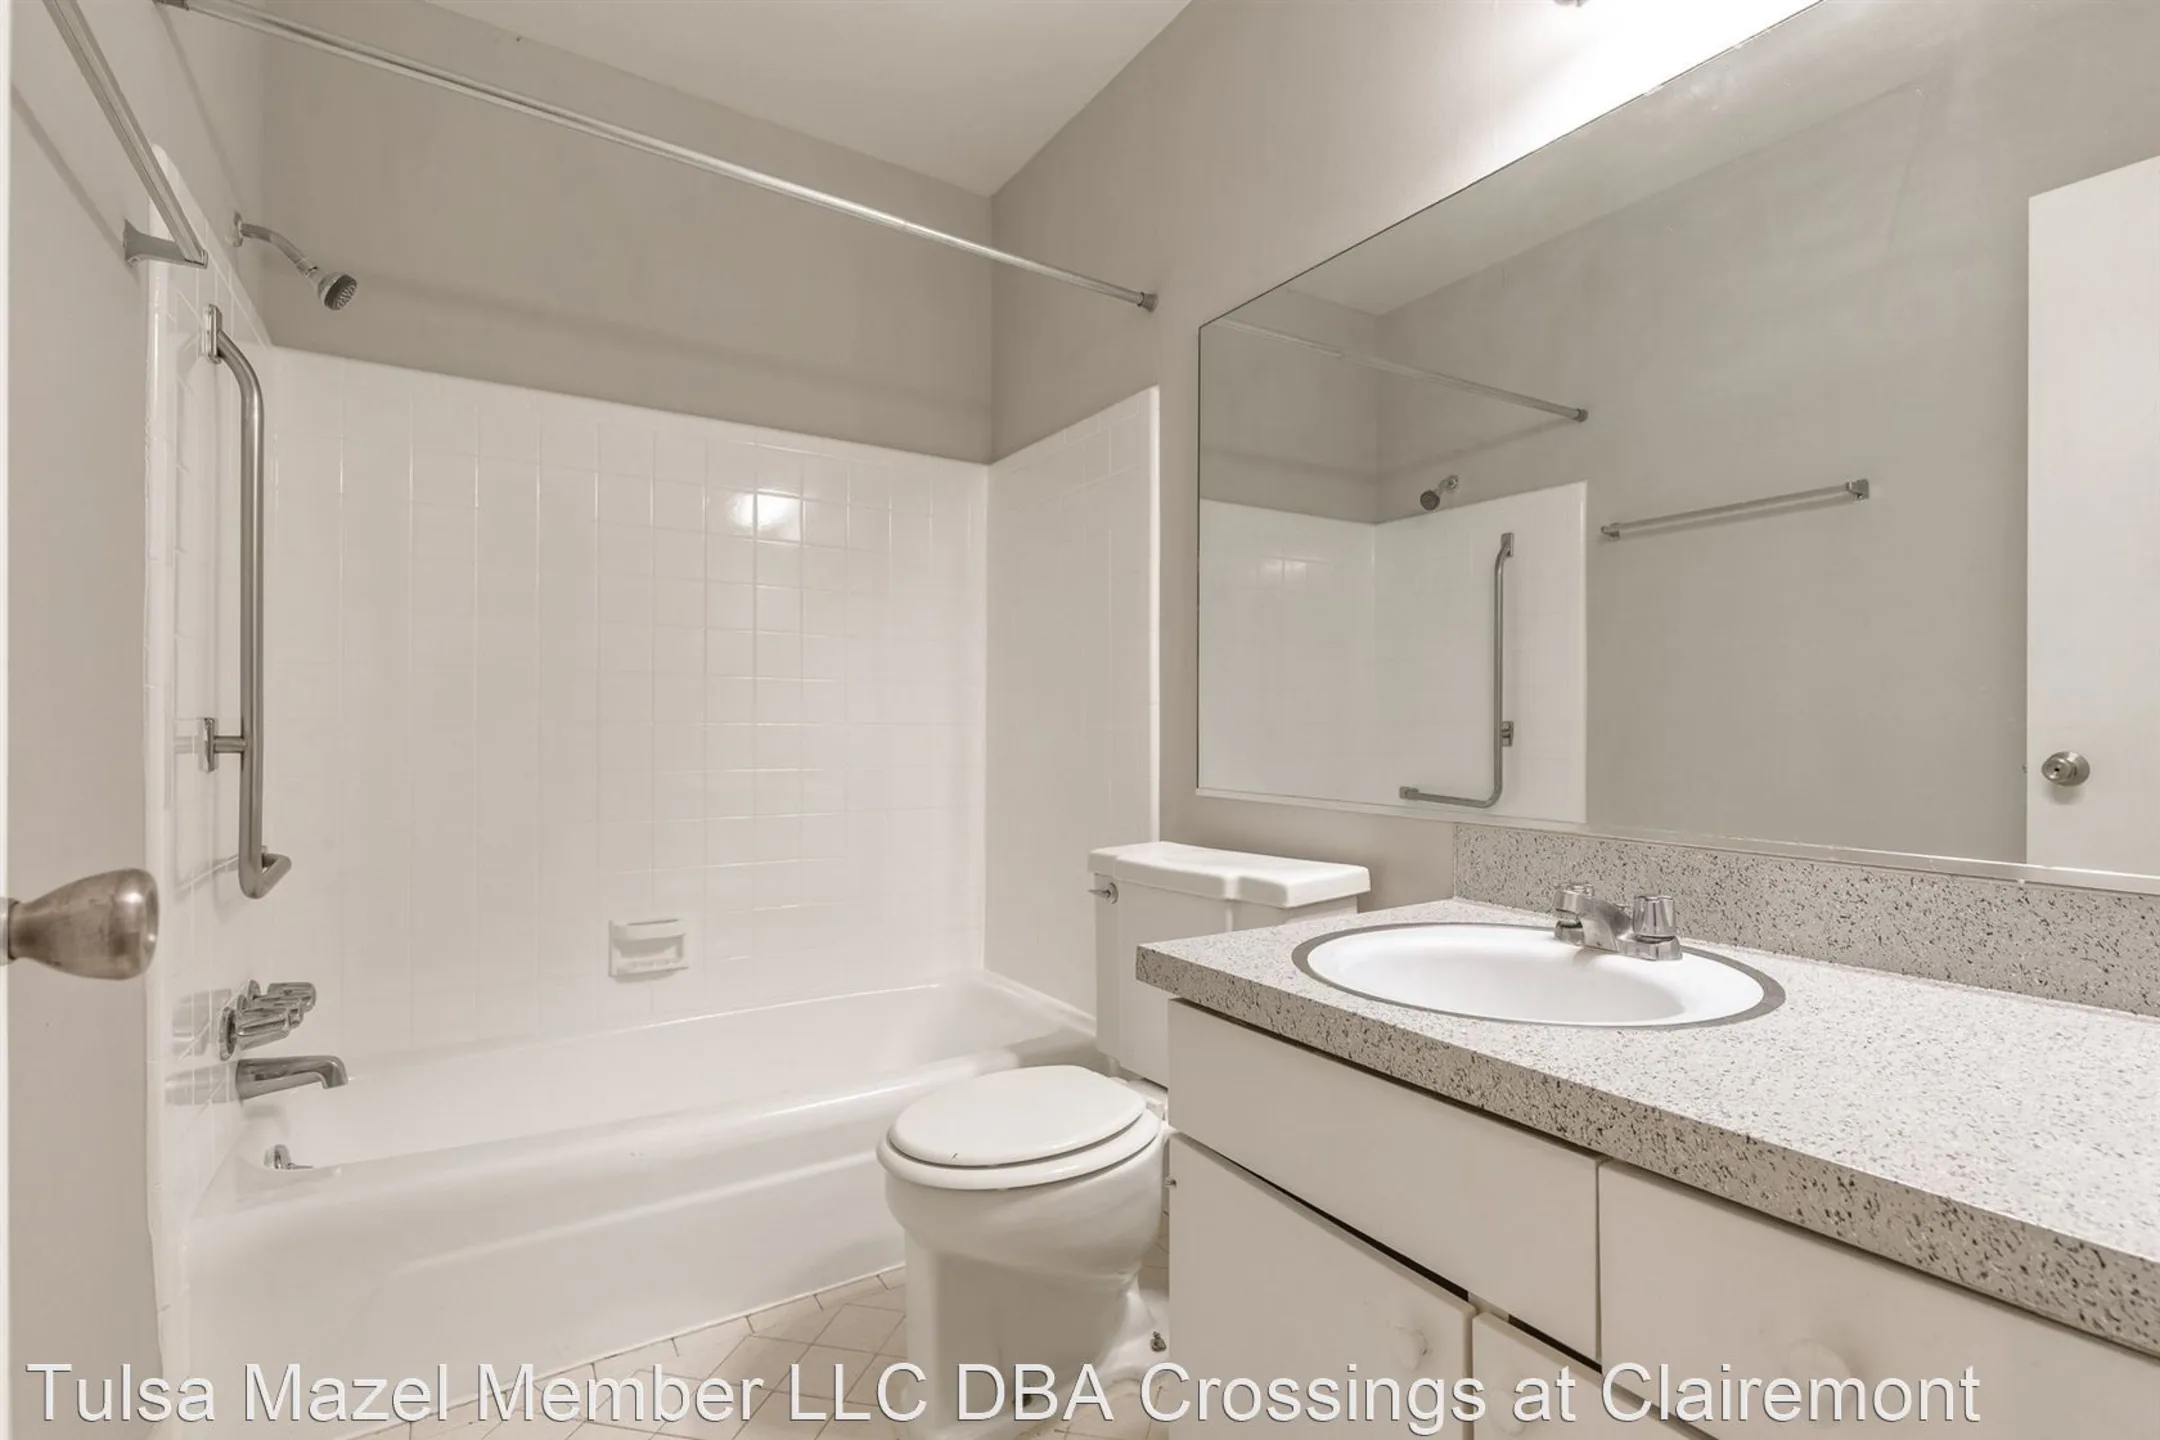 Bathroom - Crossings at Clairemont - Tulsa, OK